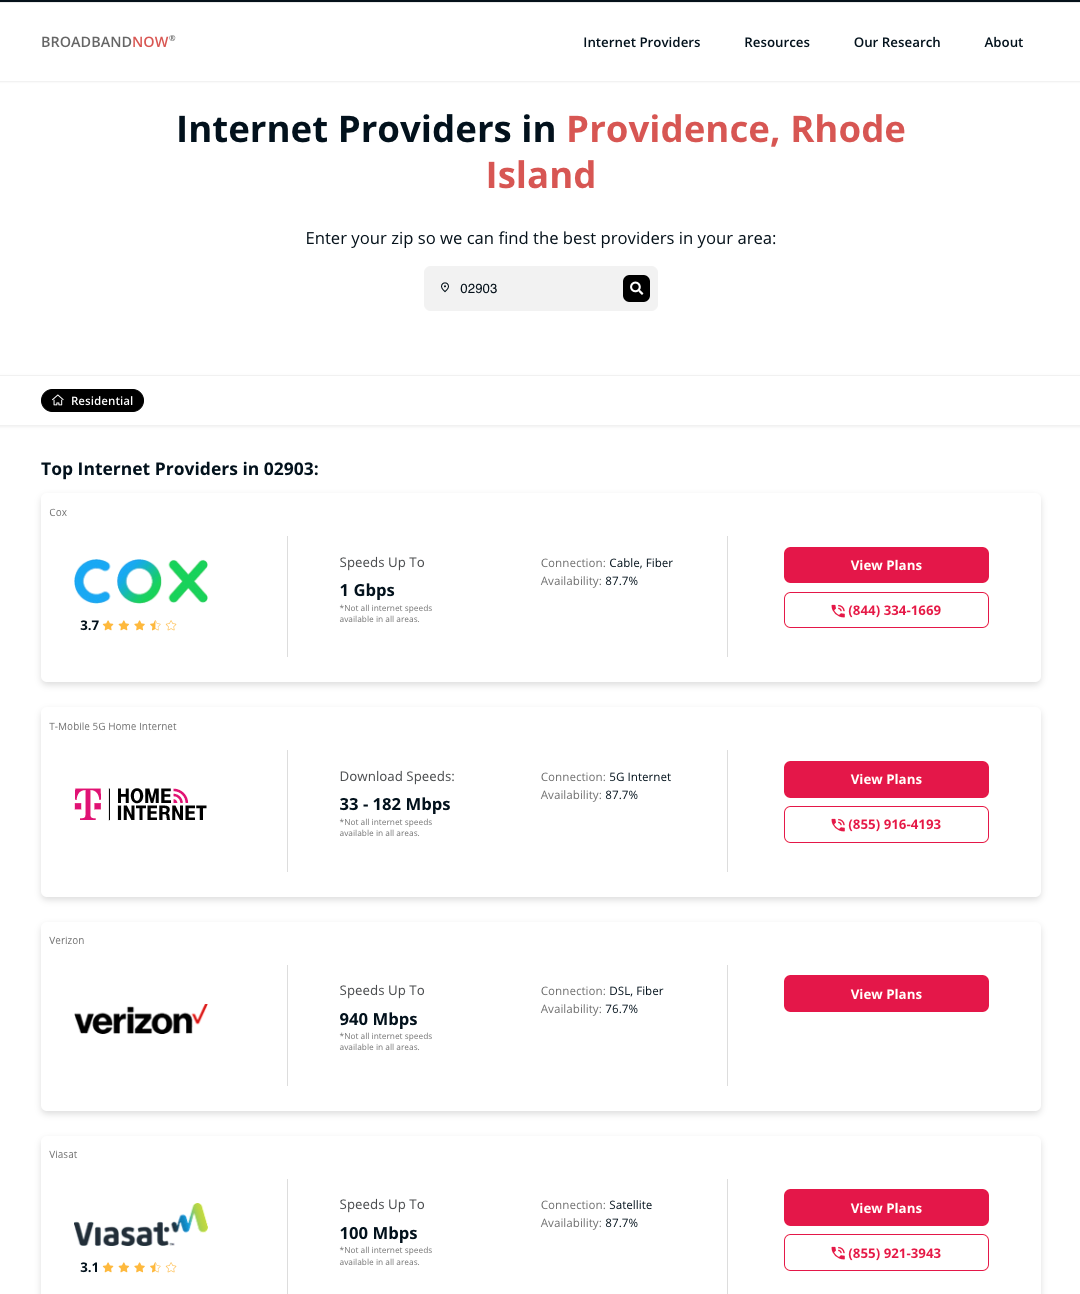 Search results for internet providers in 02903, a zip code in Providence, R.I., on BroadbandNow.